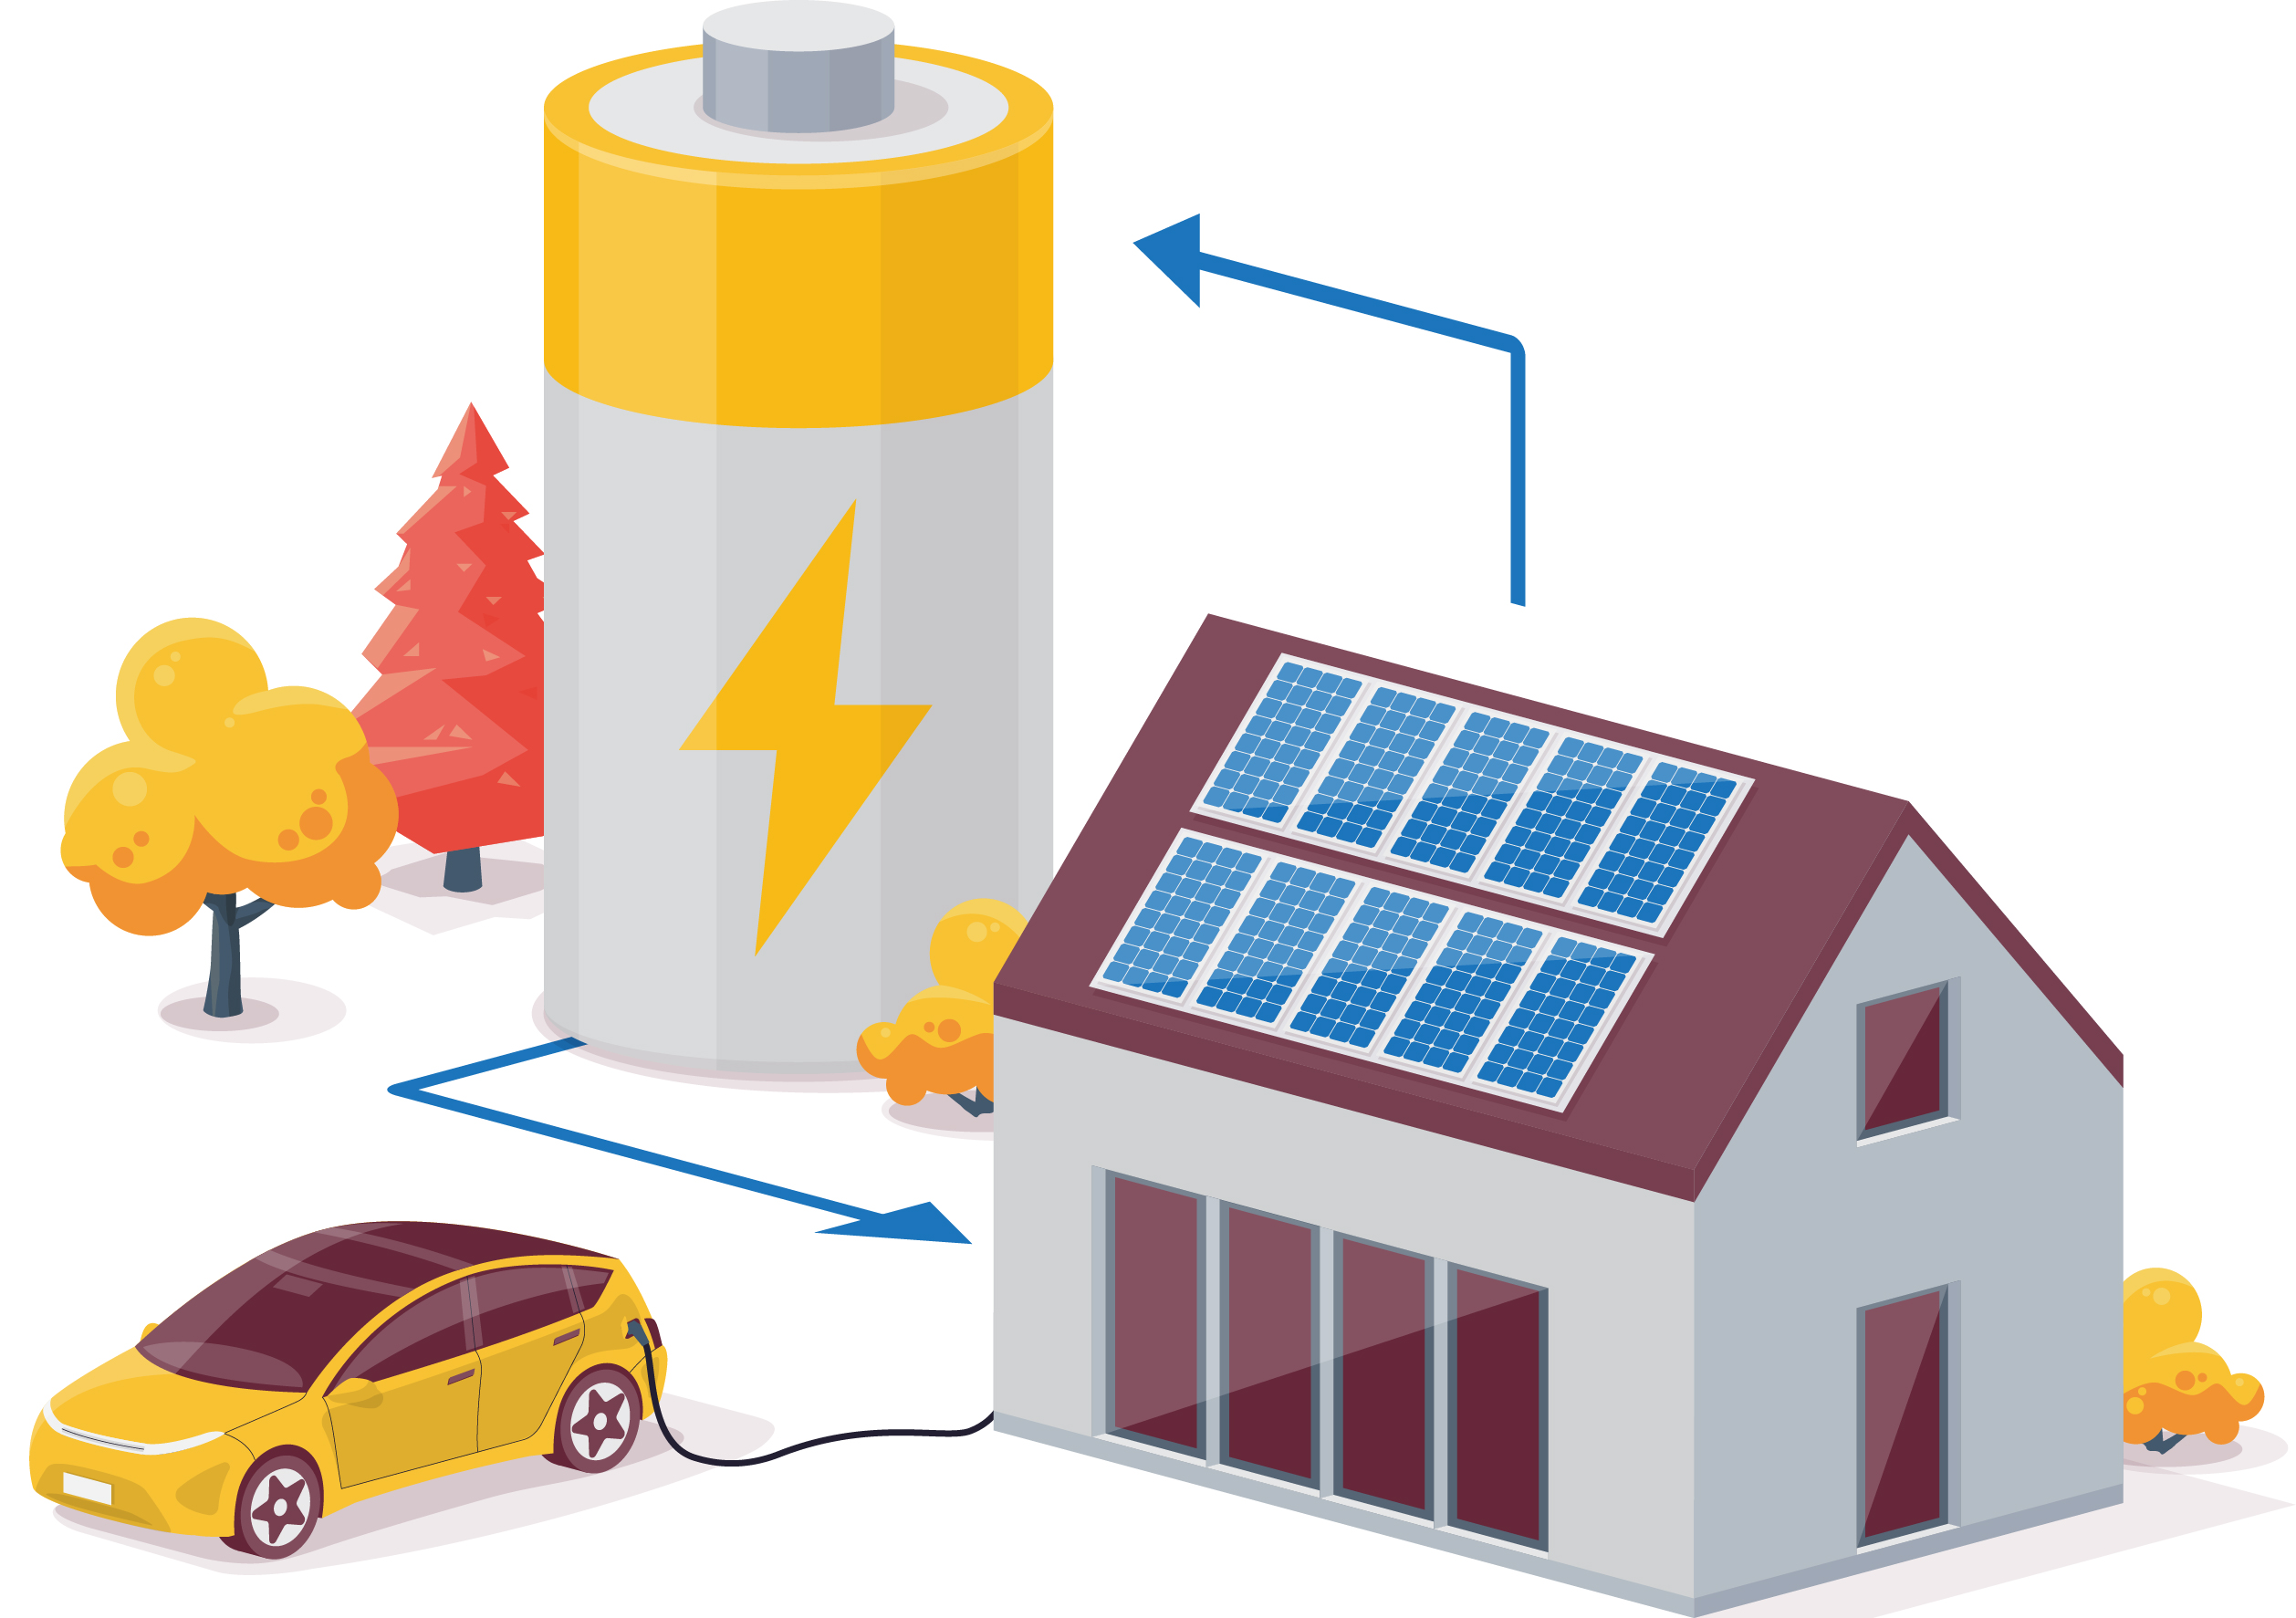 Infographic showing a high self-sufficiency home with a battery and electric vehicle